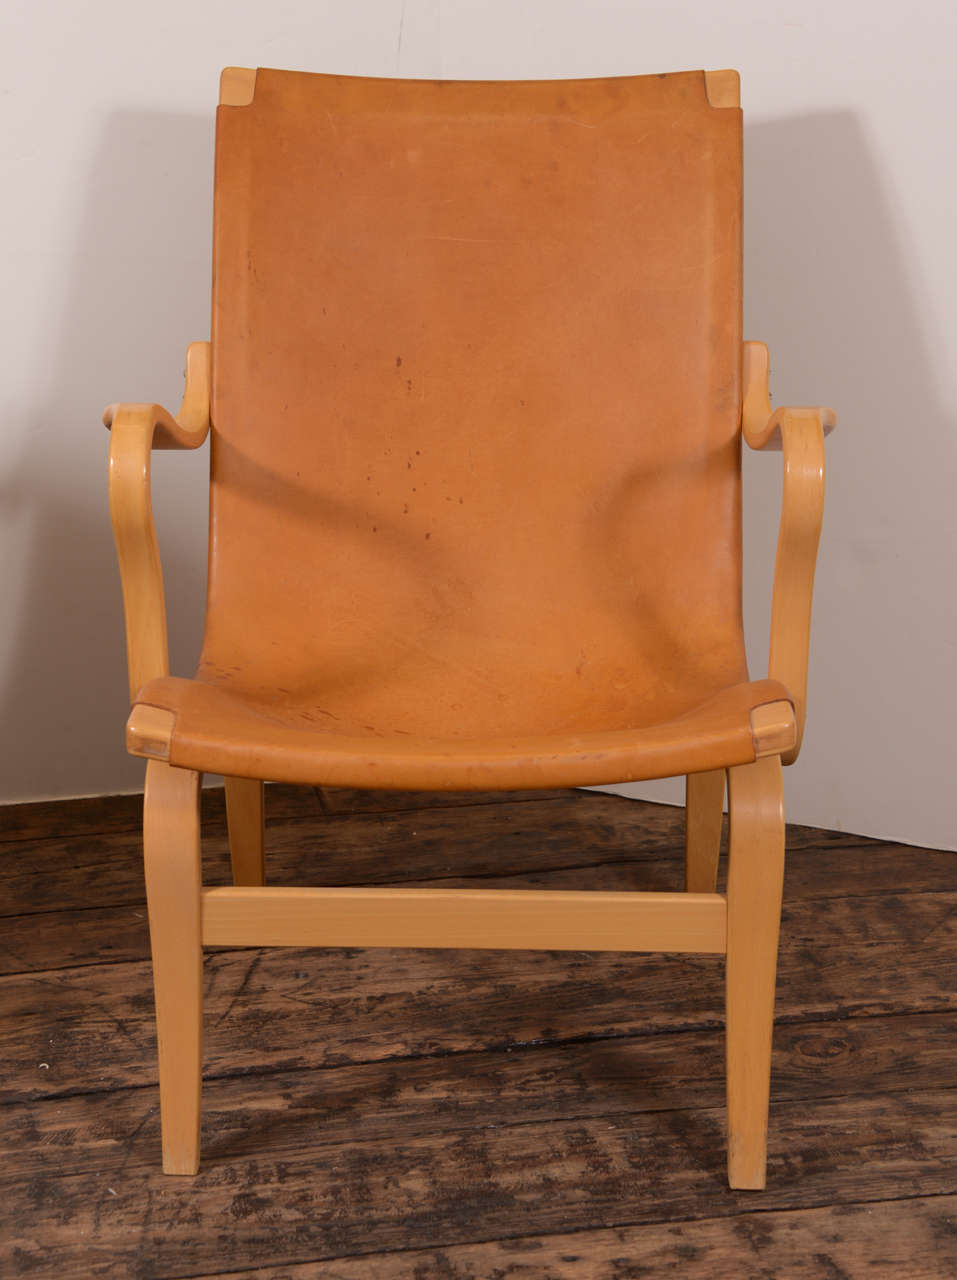 Pair of handsome vintage Bruno Matthson Mina chairs, 1978
Camel colored leather, some old stains on the leather as you can see in photos.  Great condition though. Very comfortable and classic chairs!